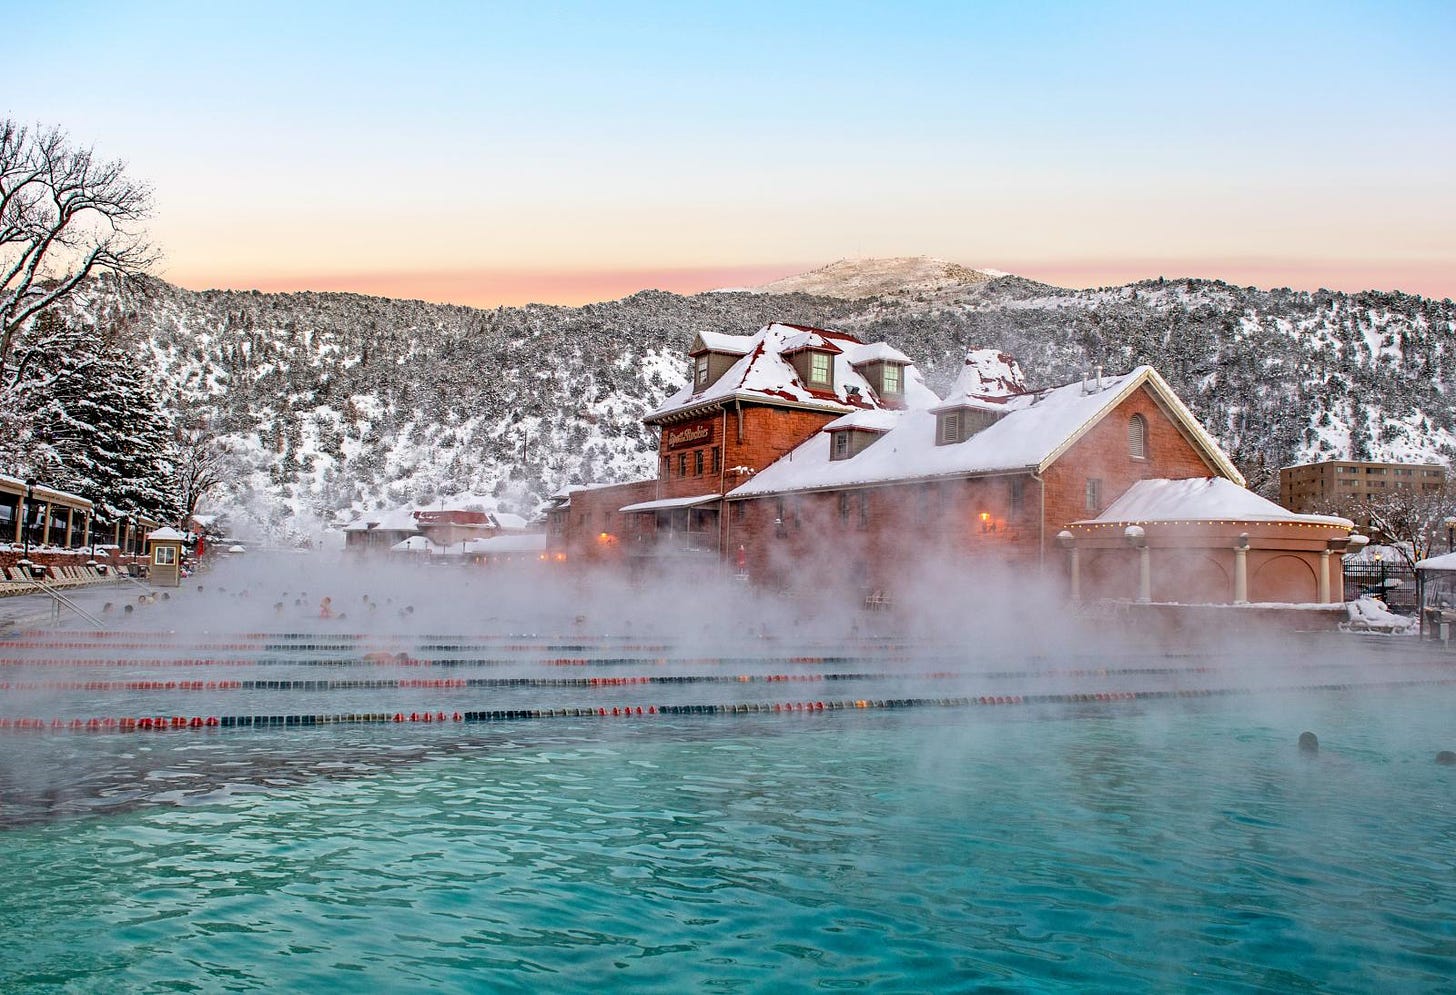 Steam pours off of an enormous outdoor swimming pool, filled with swimmers. In the background, snow covers the buildings around it and the slopes of Glenwood Canyon.